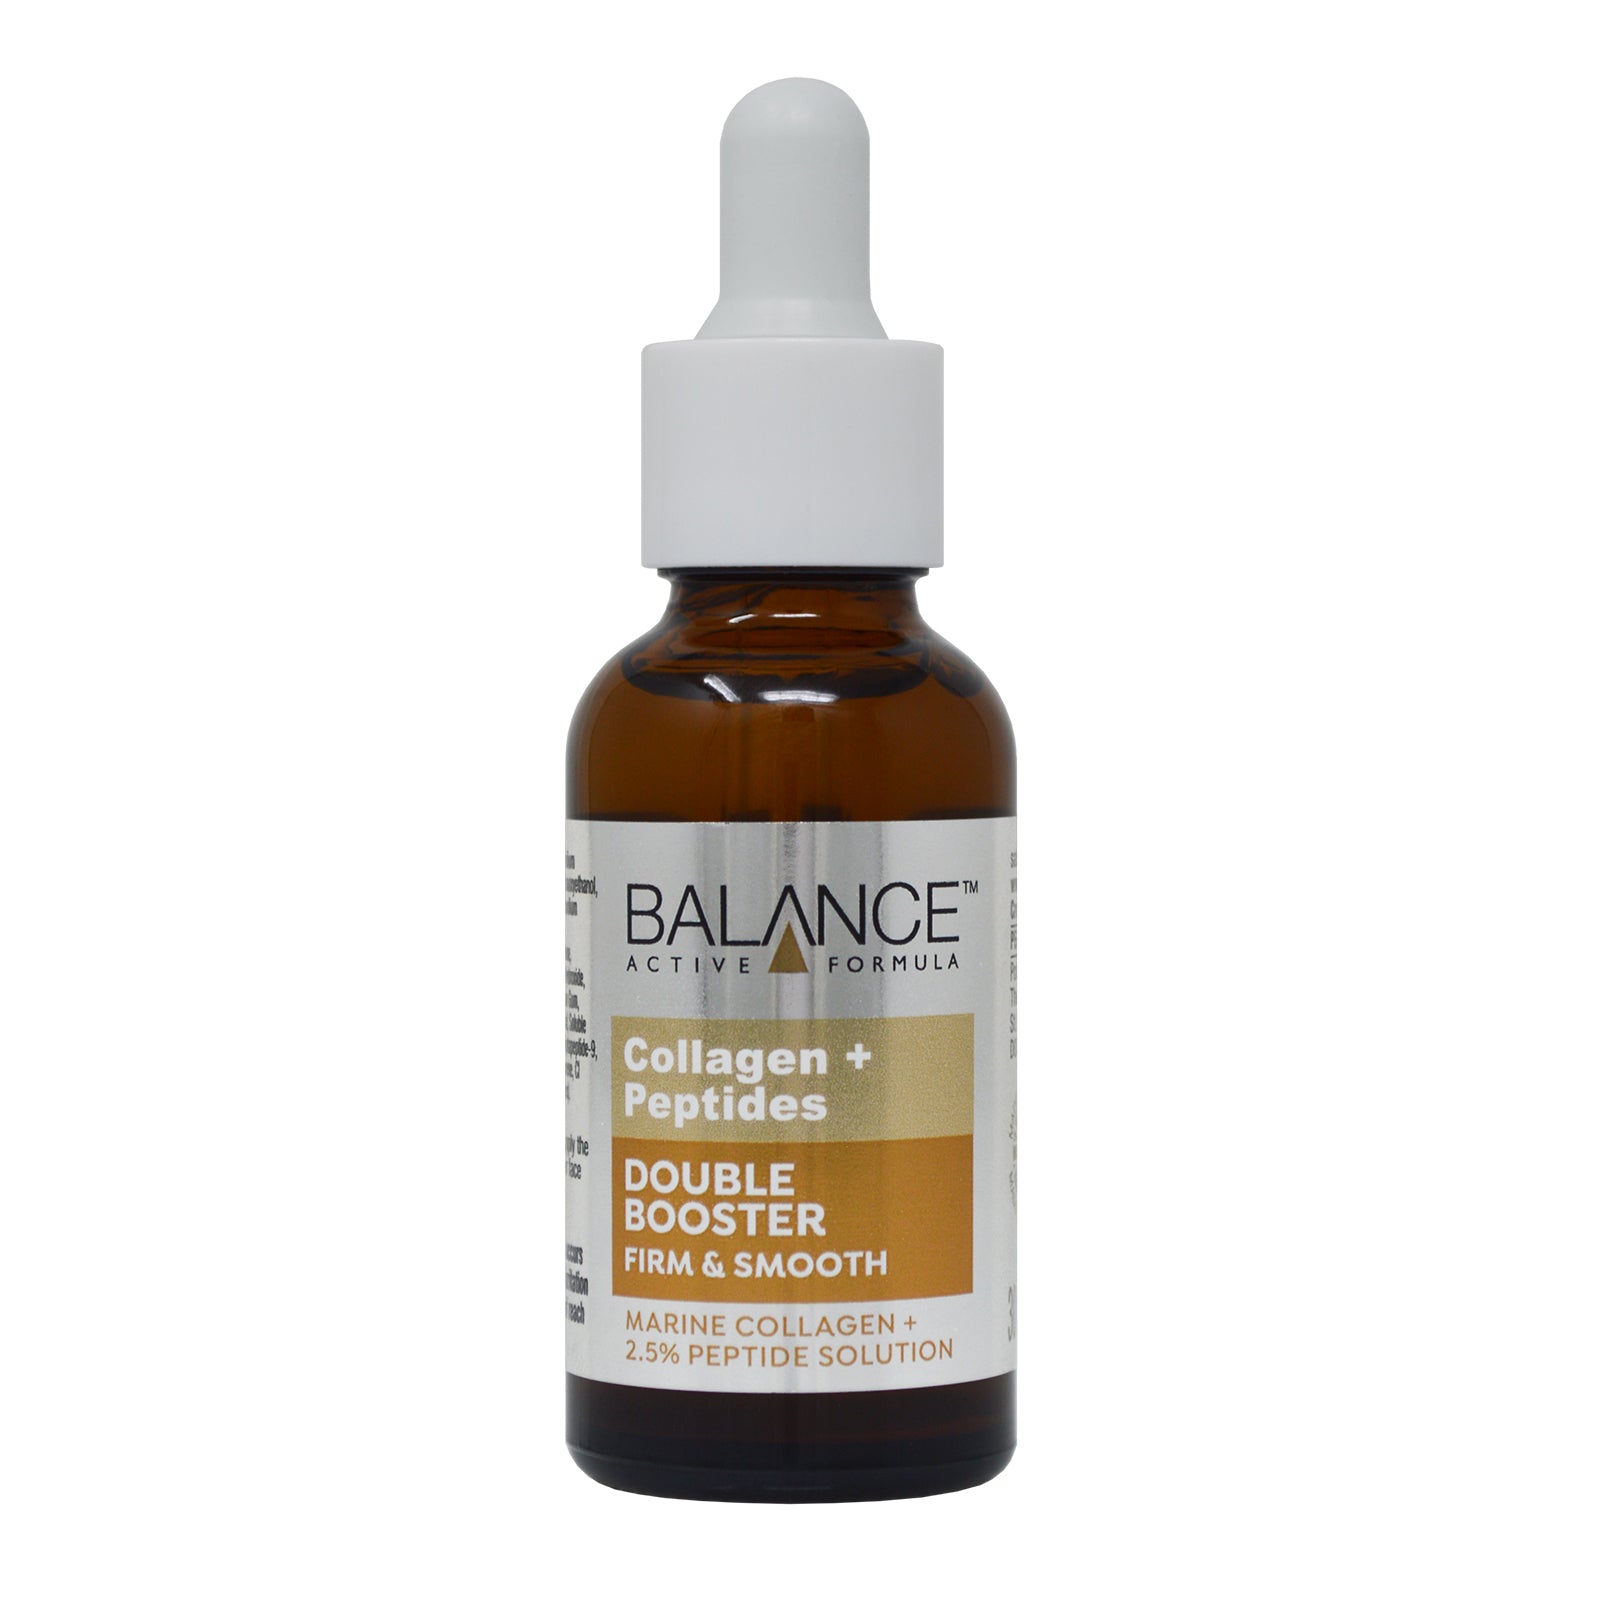 Balance Active Formula Collagen + 2.5% Peptide Solution Double Booster Serum